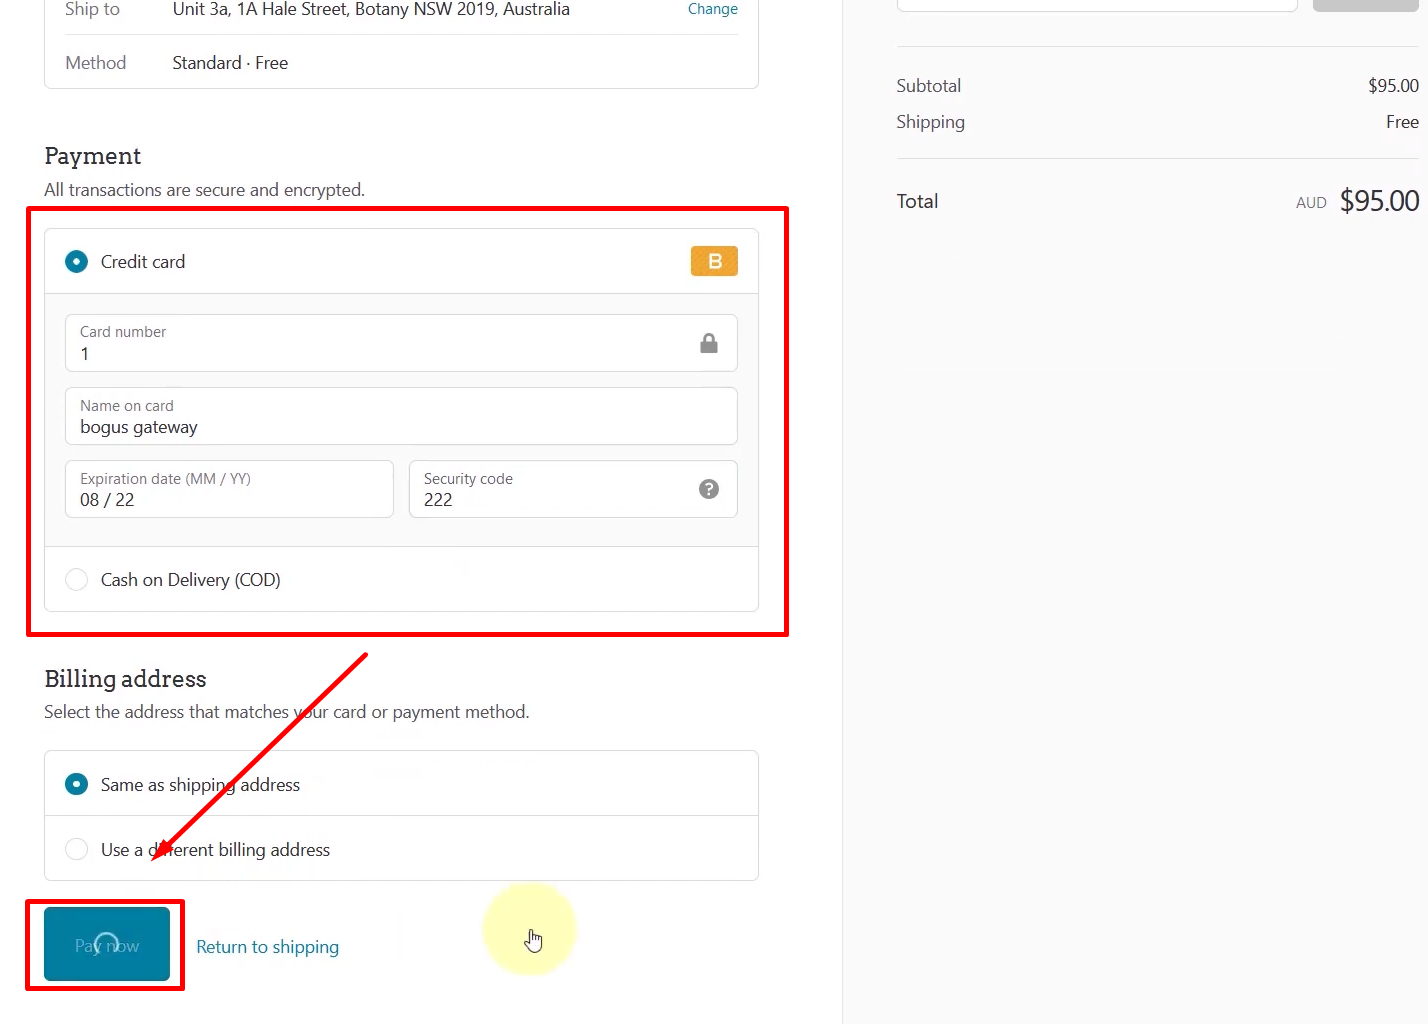 sync sales order data from sap b1 to shopify